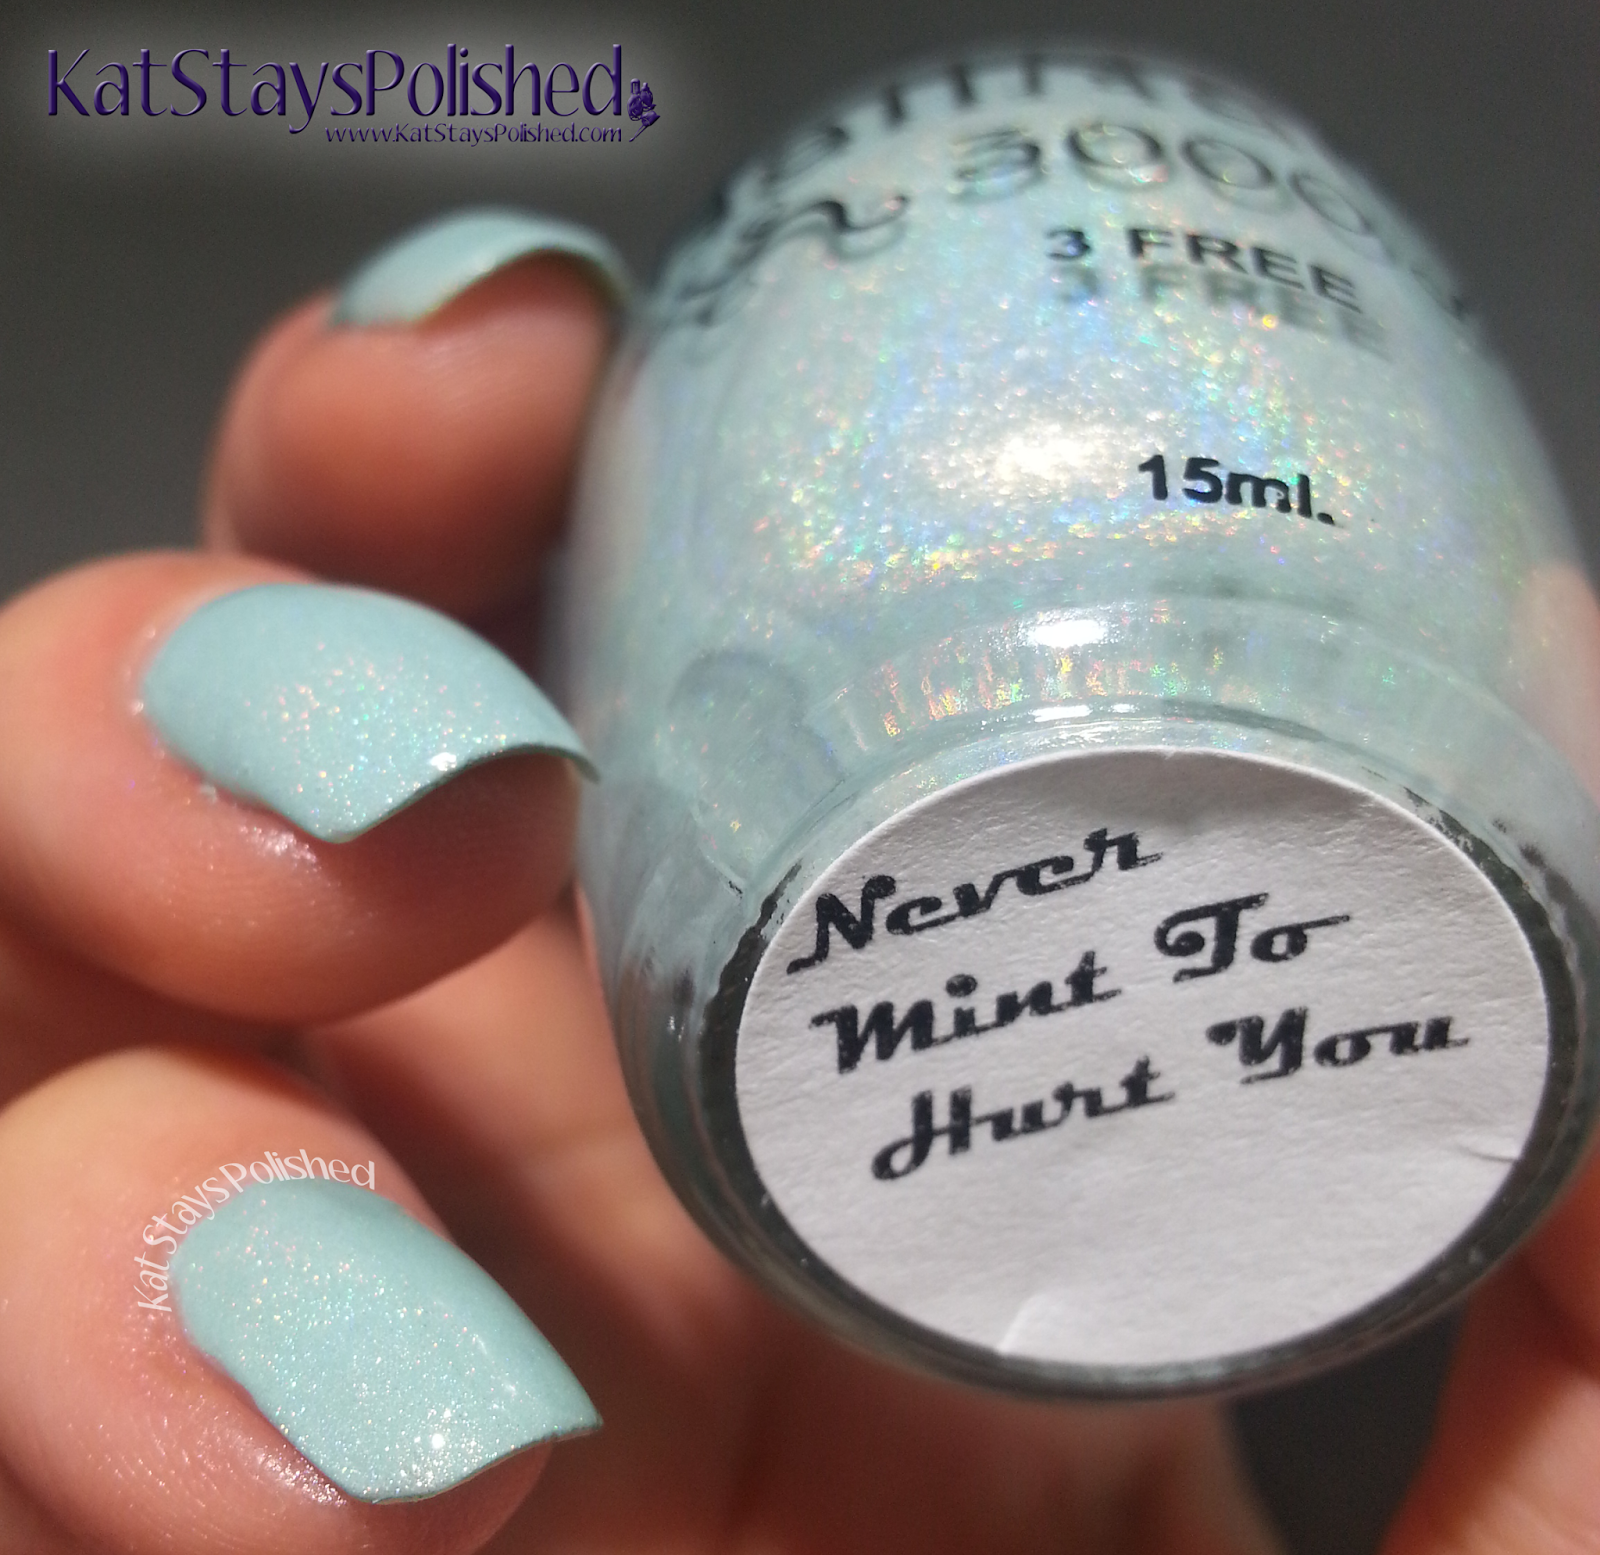 NailNation3000 - Never Mint to Hurt You | Kat Stays Polished